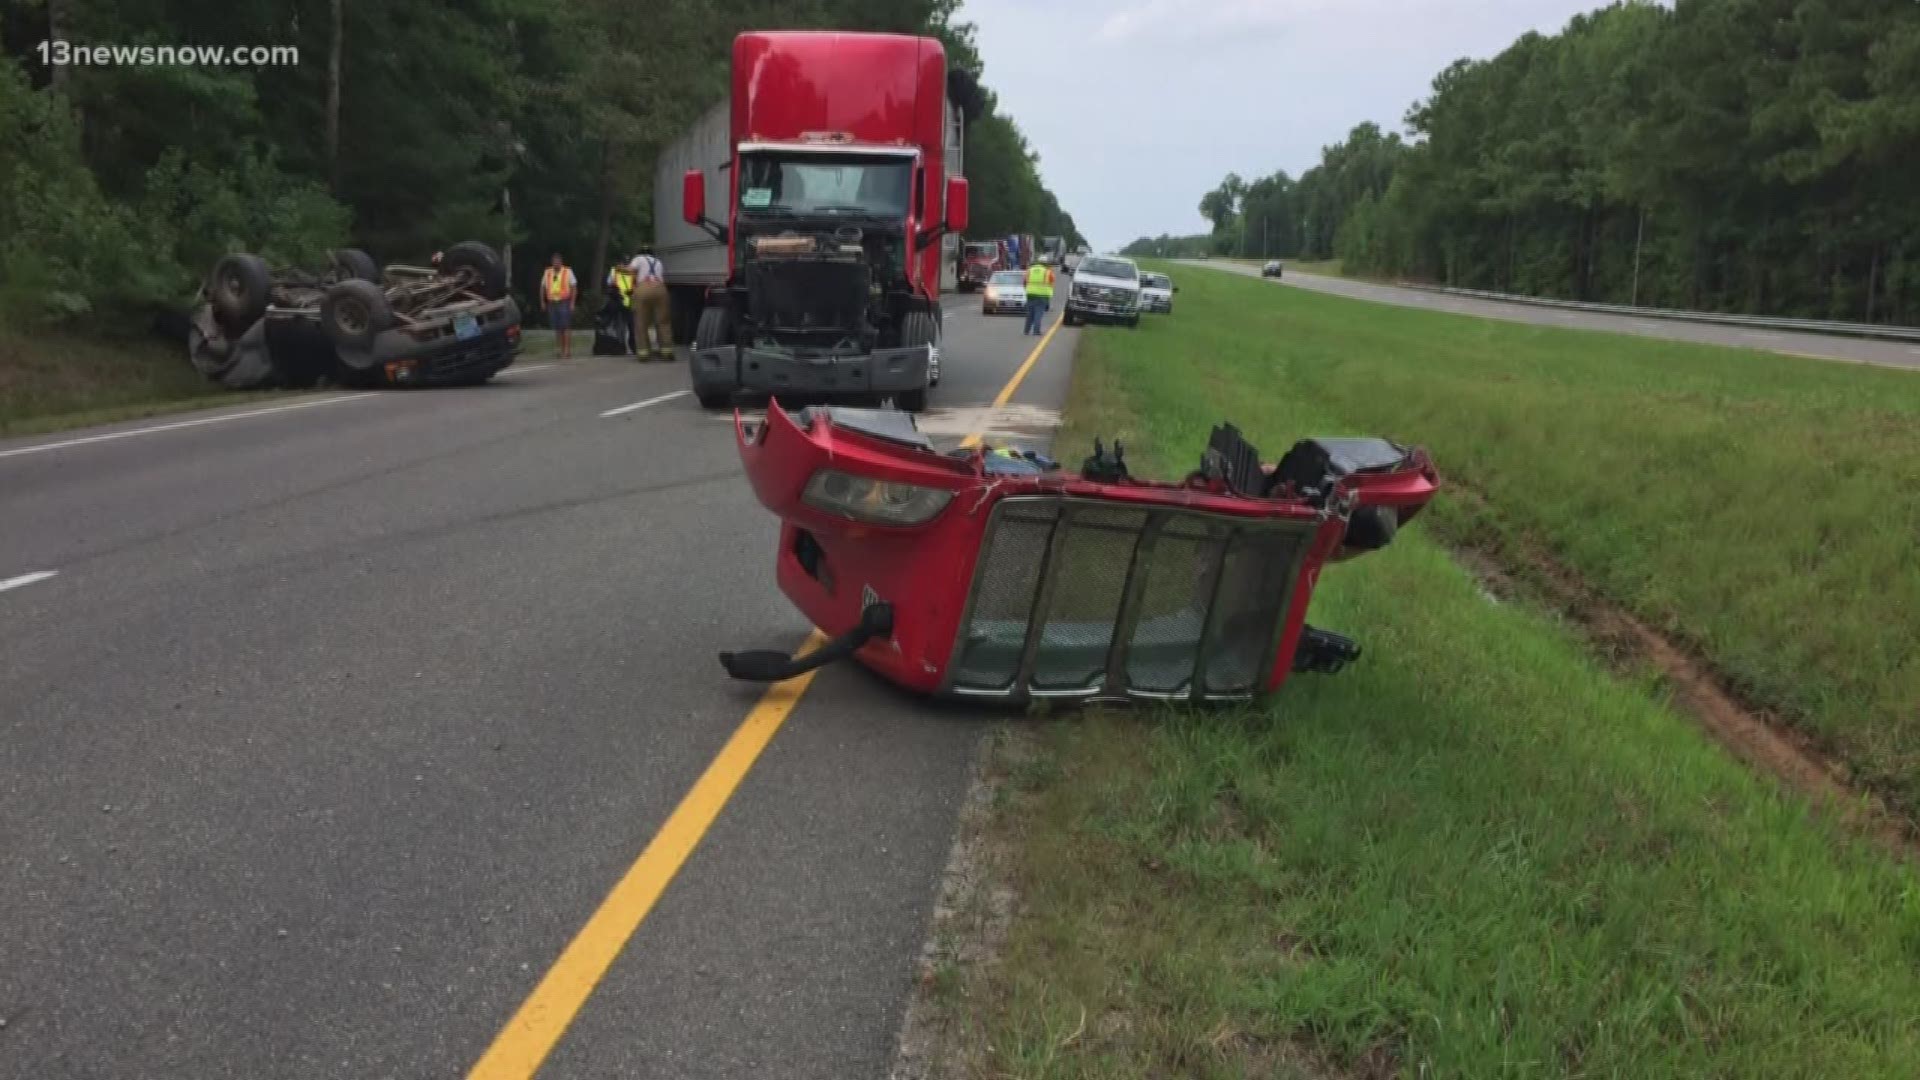 Virginia State Police are investigating two crashes that happened on Route 17 Tuesday morning. Both crashes involved tractor-trailers.